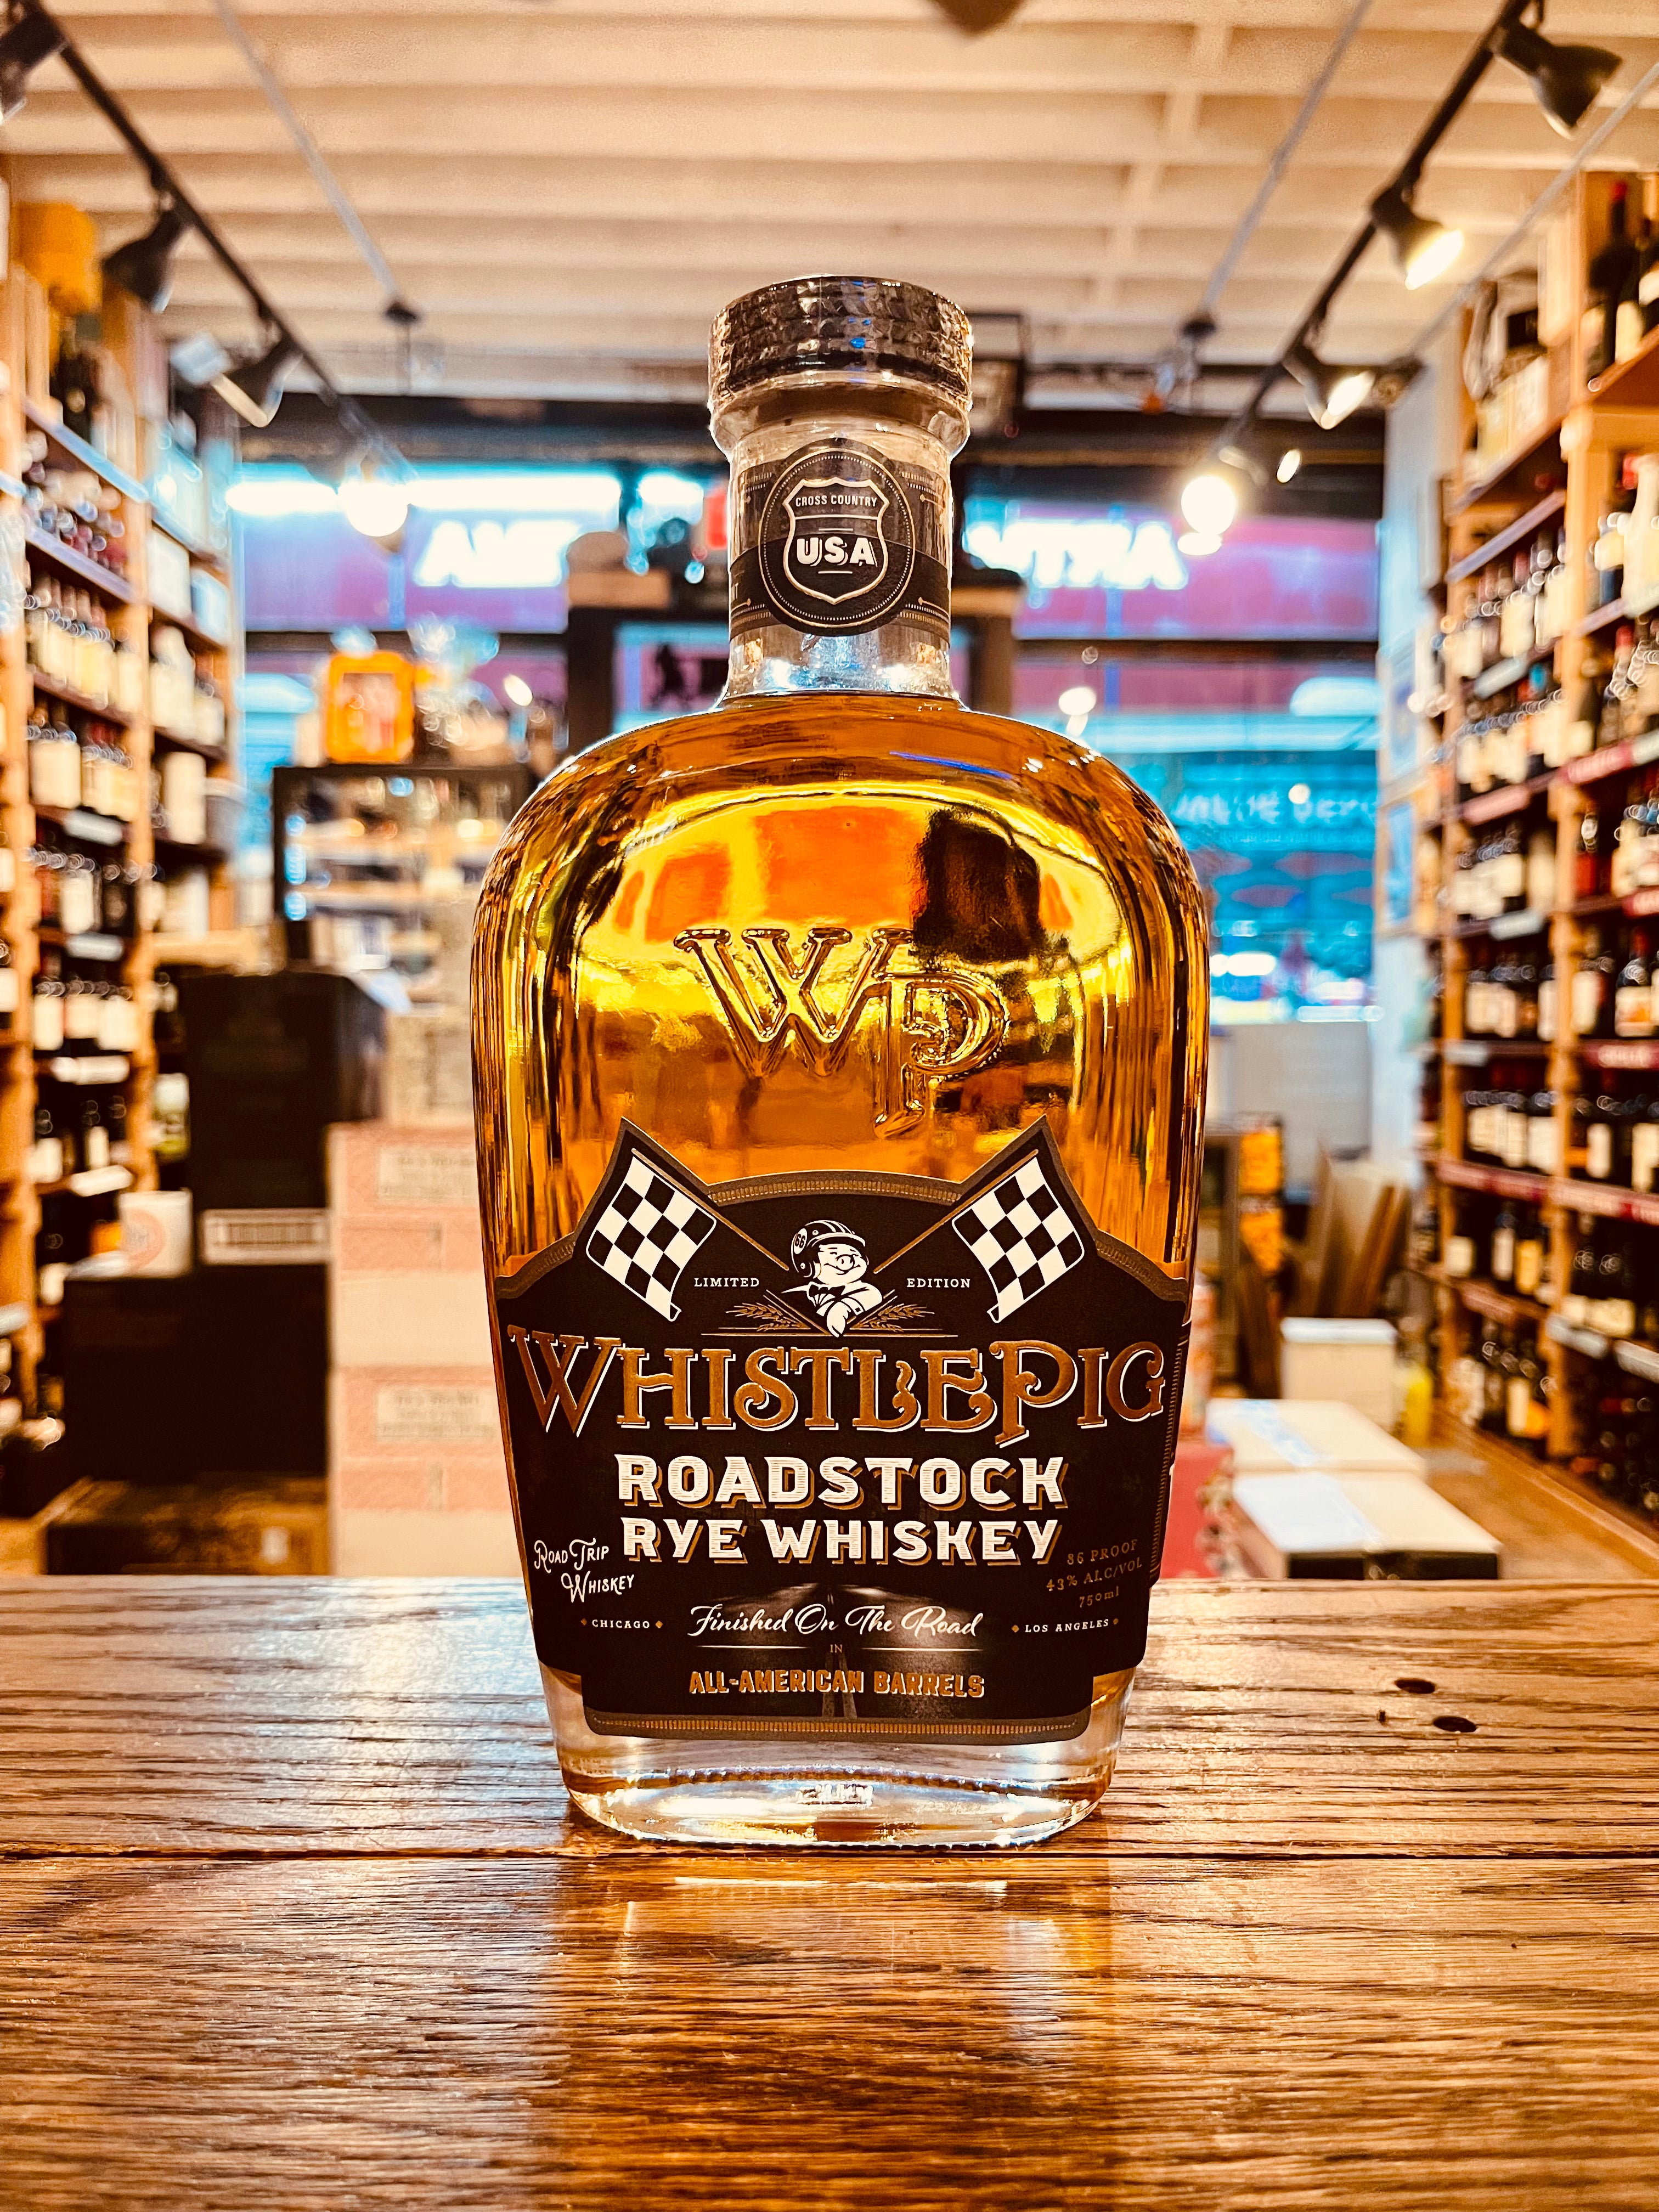 Whistle Pig Roadstock Rye Whiskey 750mL a robustly shaped clear glass bottle with a black label and a wooden top